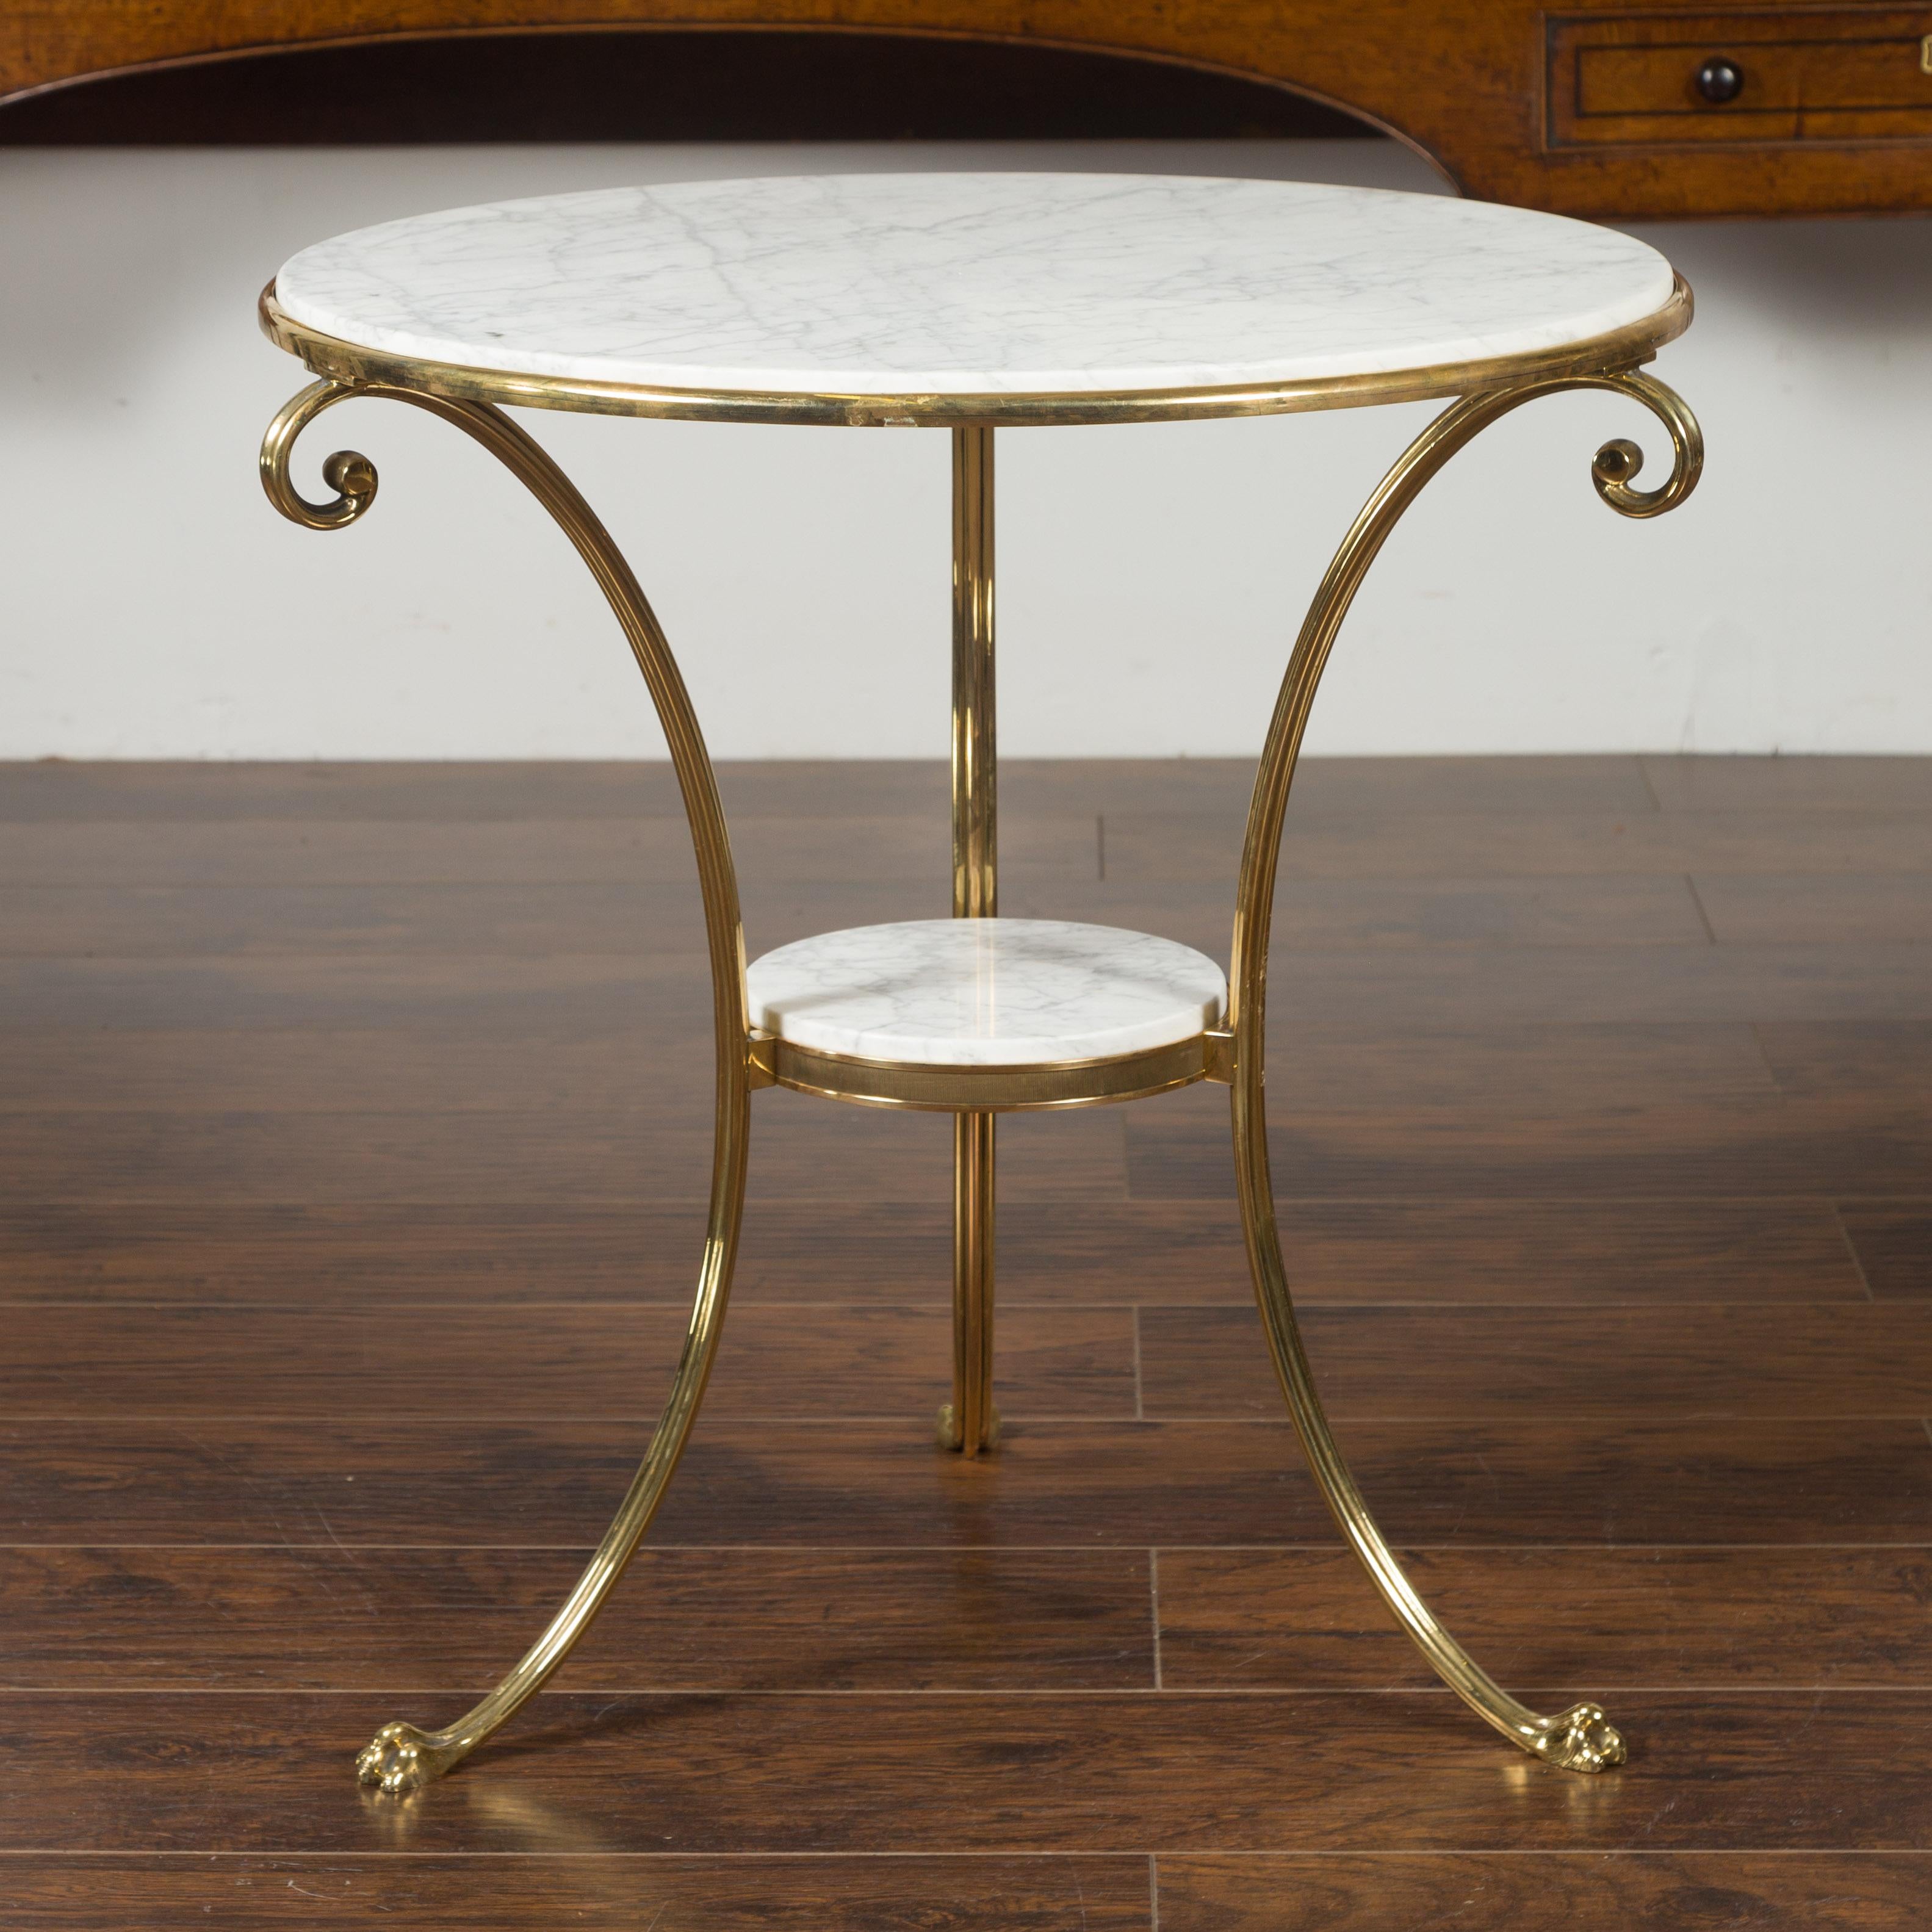 Midcentury Italian Brass Table with Round White Marble Top and Scrolling Legs 6